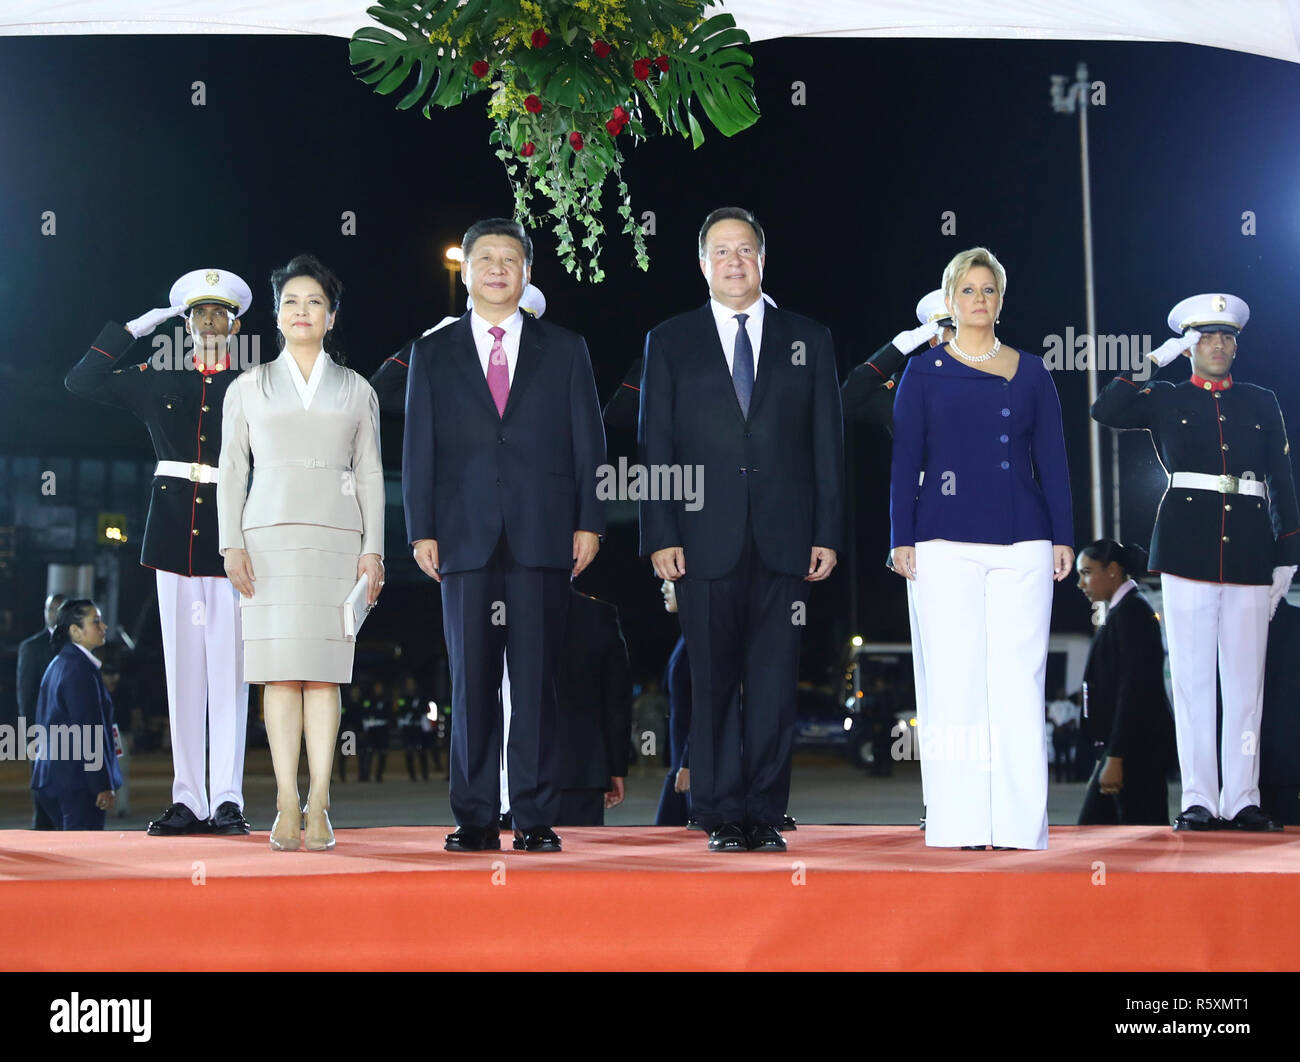 Panama City, Peng Liyuan (1st L Front). 2nd Dec, 2018. Chinese President Xi Jinping (2nd L Front), his wife Peng Liyuan (1st L Front), Panamanian President Juan Carlos Varela (2nd R Front) and his wife Lorena Castillo Garcia (1st R Front) attend a grand welcoming ceremony Juan Carlos Varela held for Xi Jinping in Panama City Dec. 2, 2018. President Xi Jinping arrived here on Sunday for a state visit to Panama. Credit: Xie Huanchi/Xinhua/Alamy Live News Stock Photo